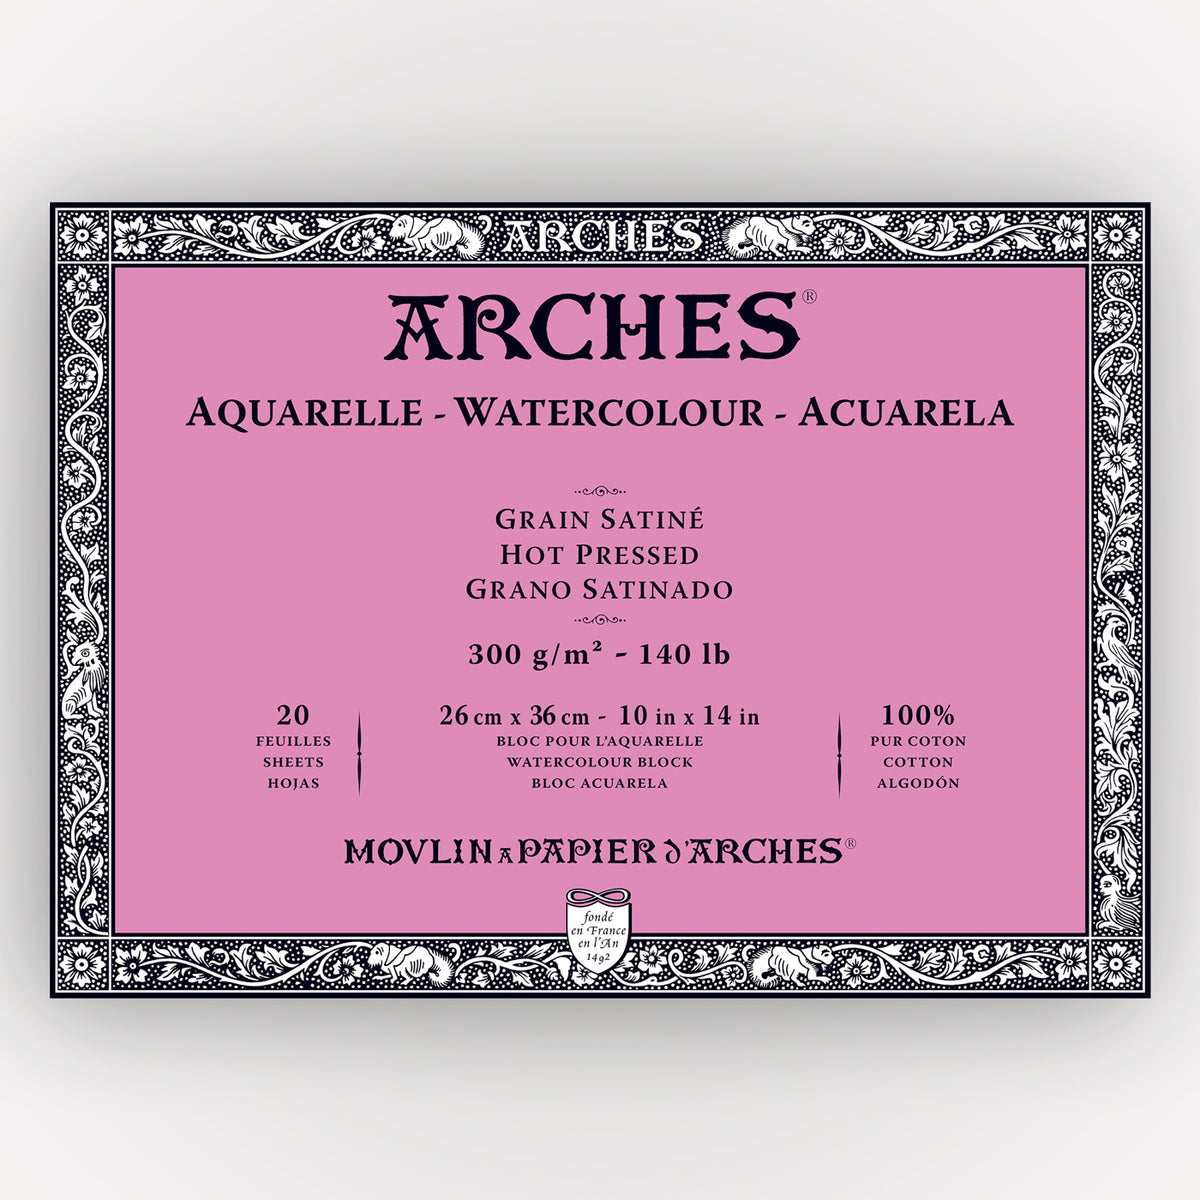 Arches Hot Pressed 26x36cm 300gms 20 sheets